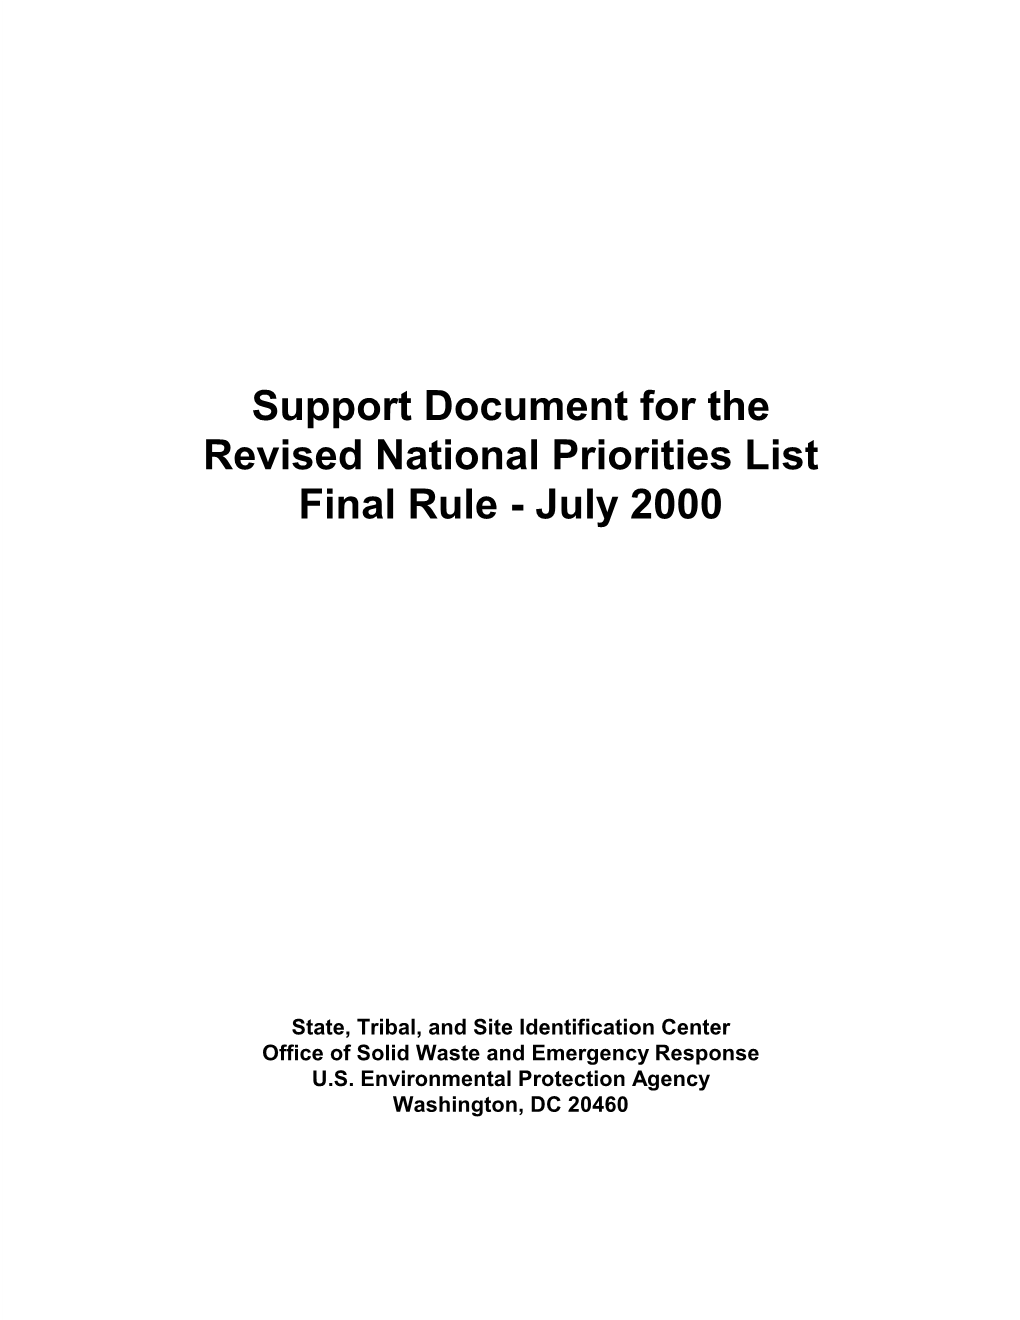 Support Document for Revised